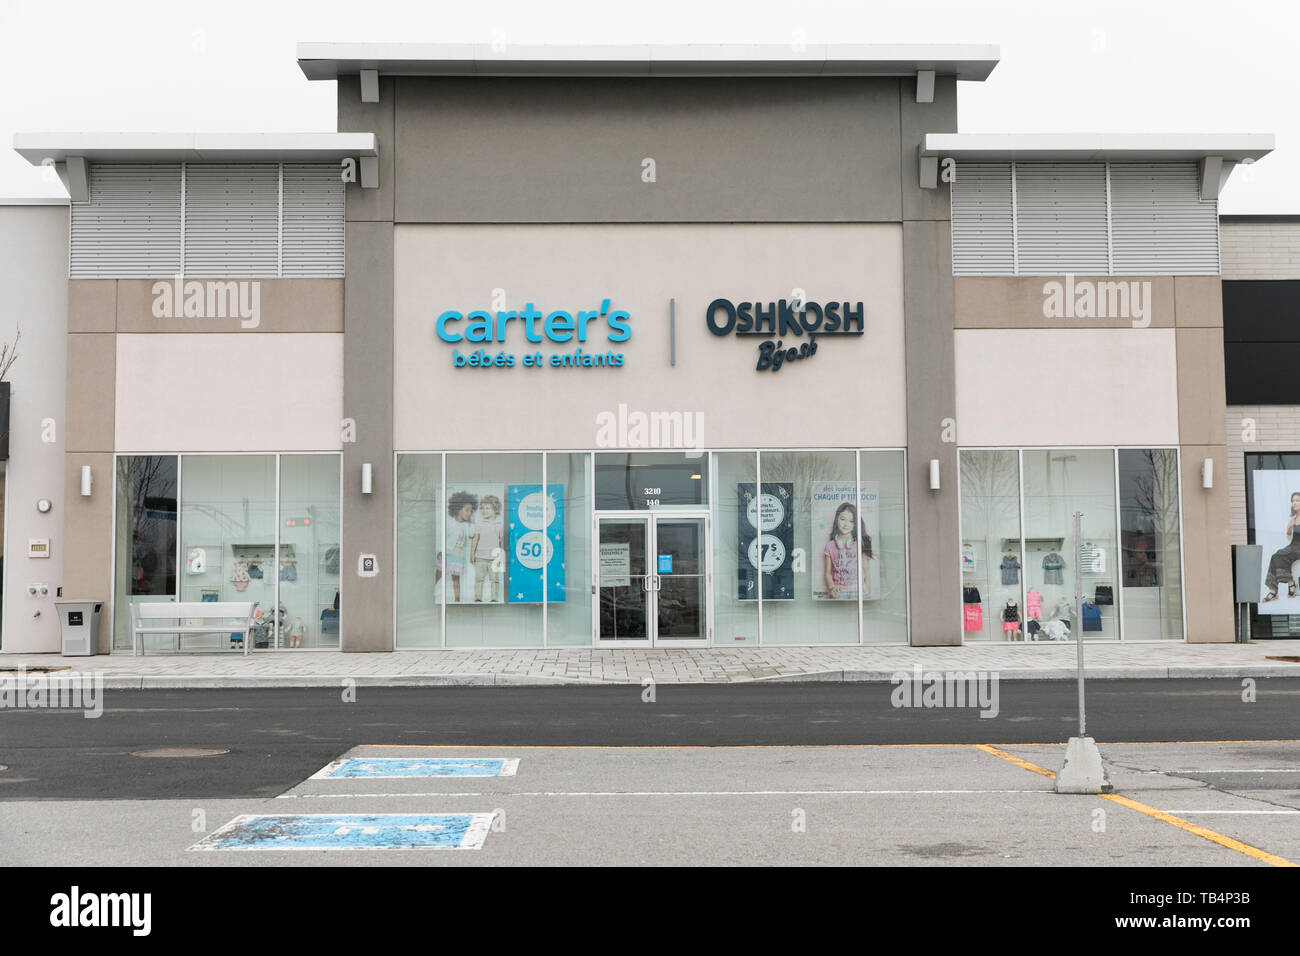 A logo sign outside of a Carter's, Inc., and OshKosh B'gosh retail store  location in Vaudreuil-Dorion, Quebec, Canada, on April 21, 2019 Stock Photo  - Alamy